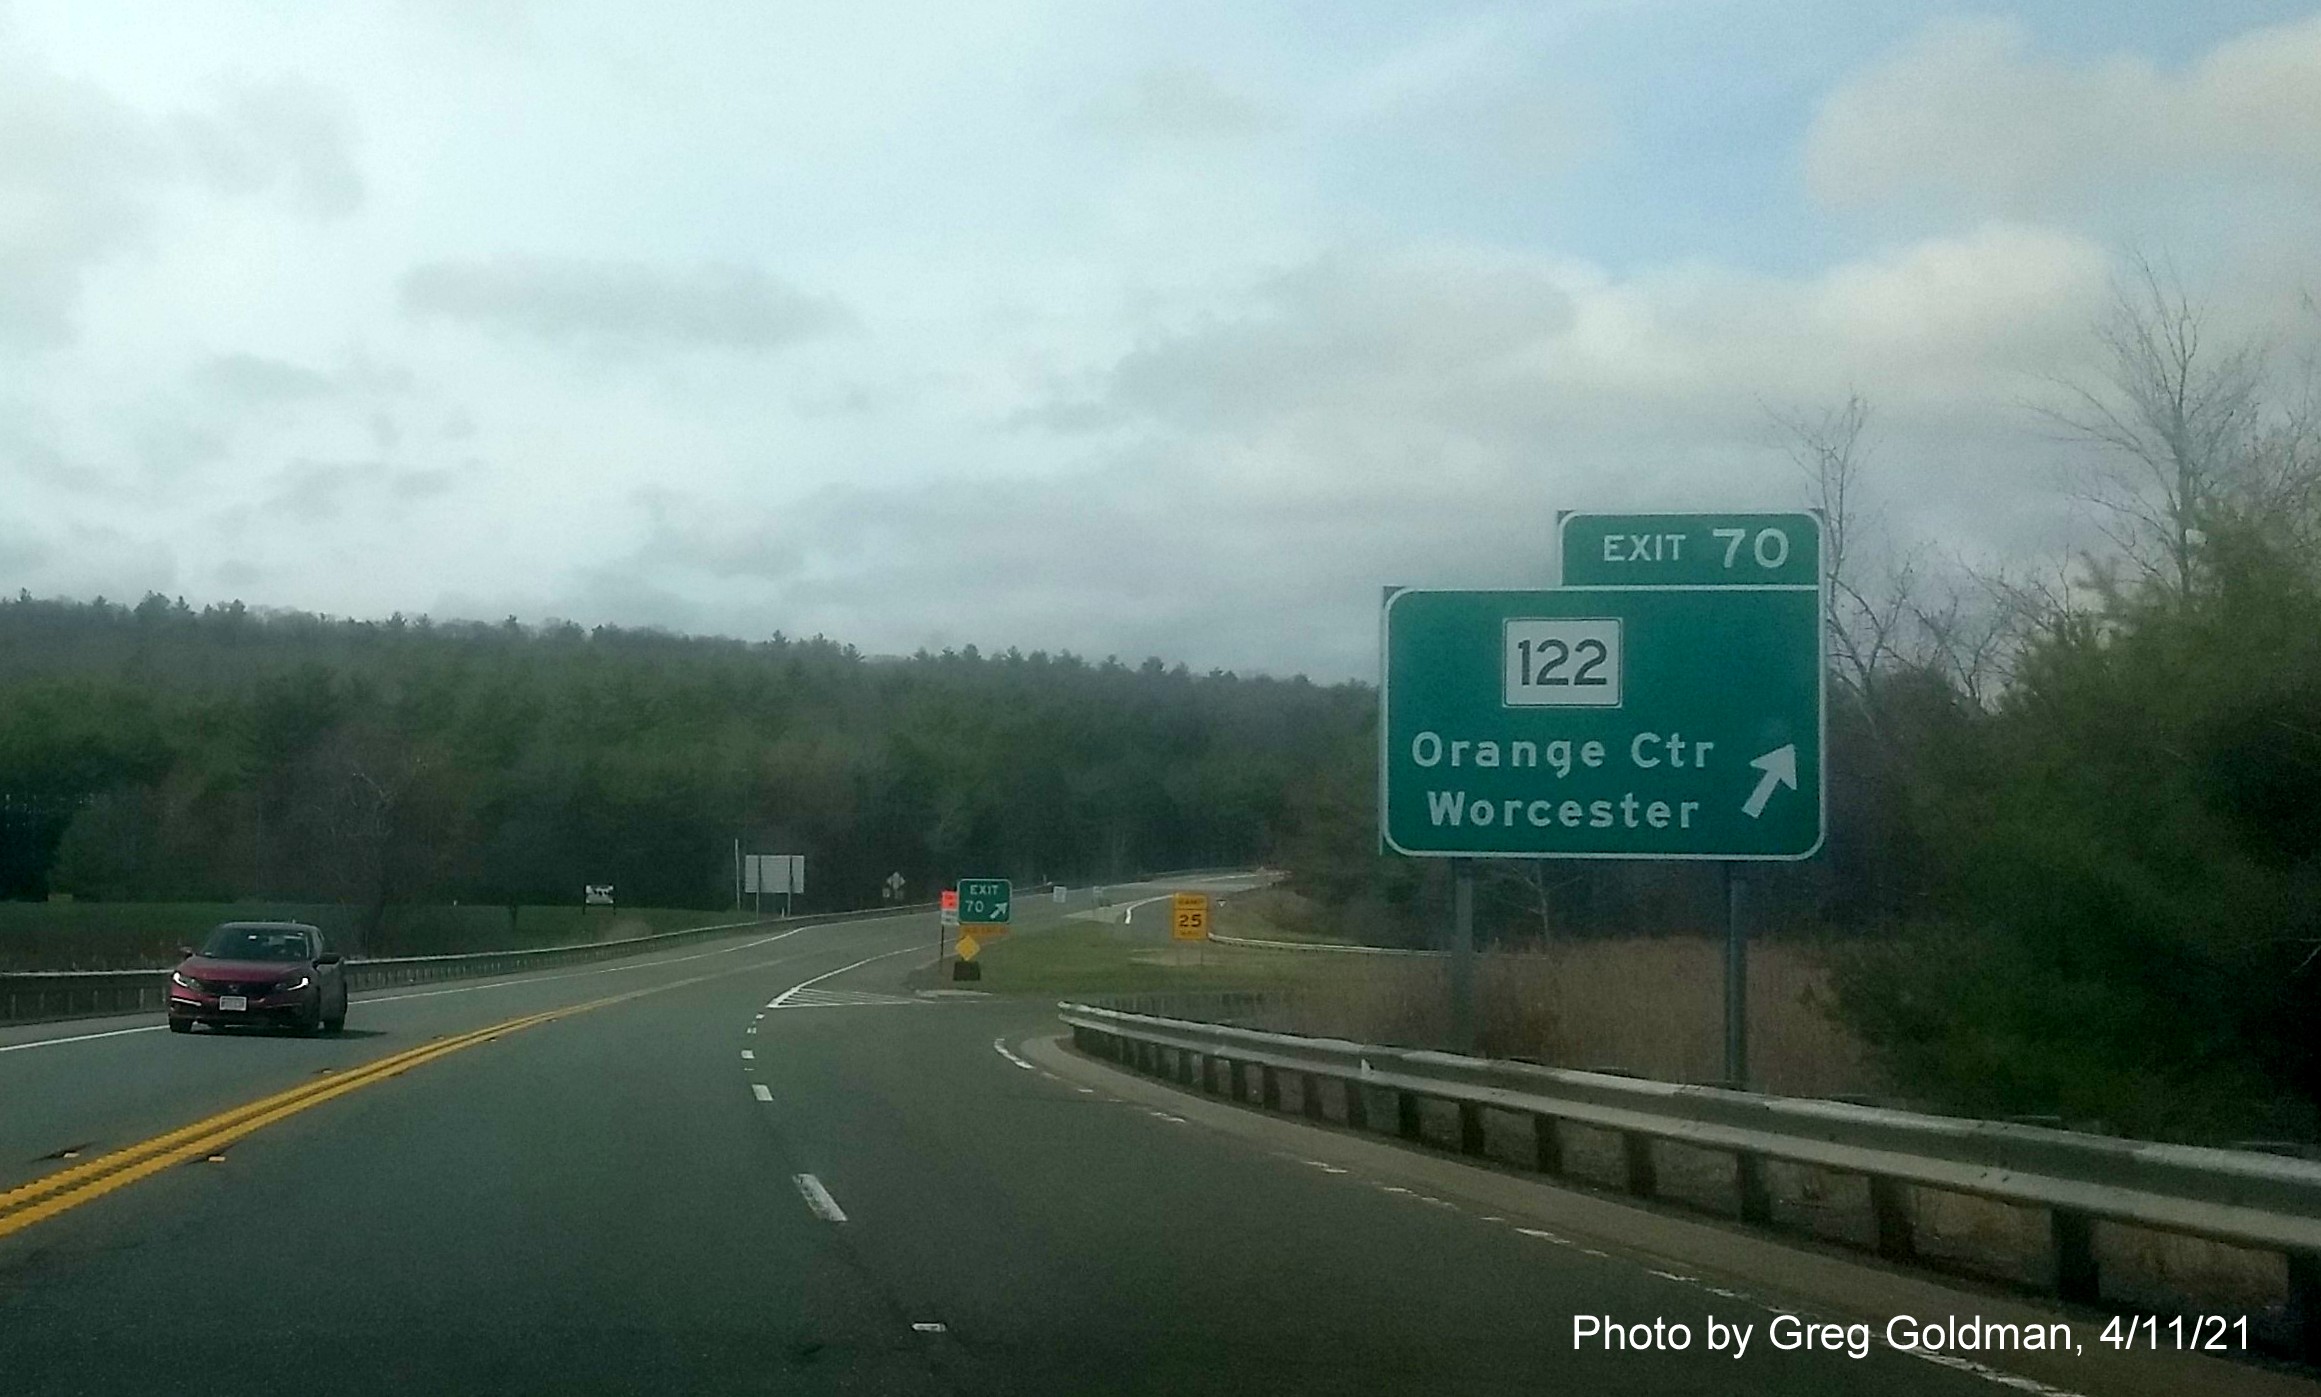 Image of ramp sign for MA 122 exit with new milepost based exit number on MA 2 West in Orange, by Greg Goldman, April 2021